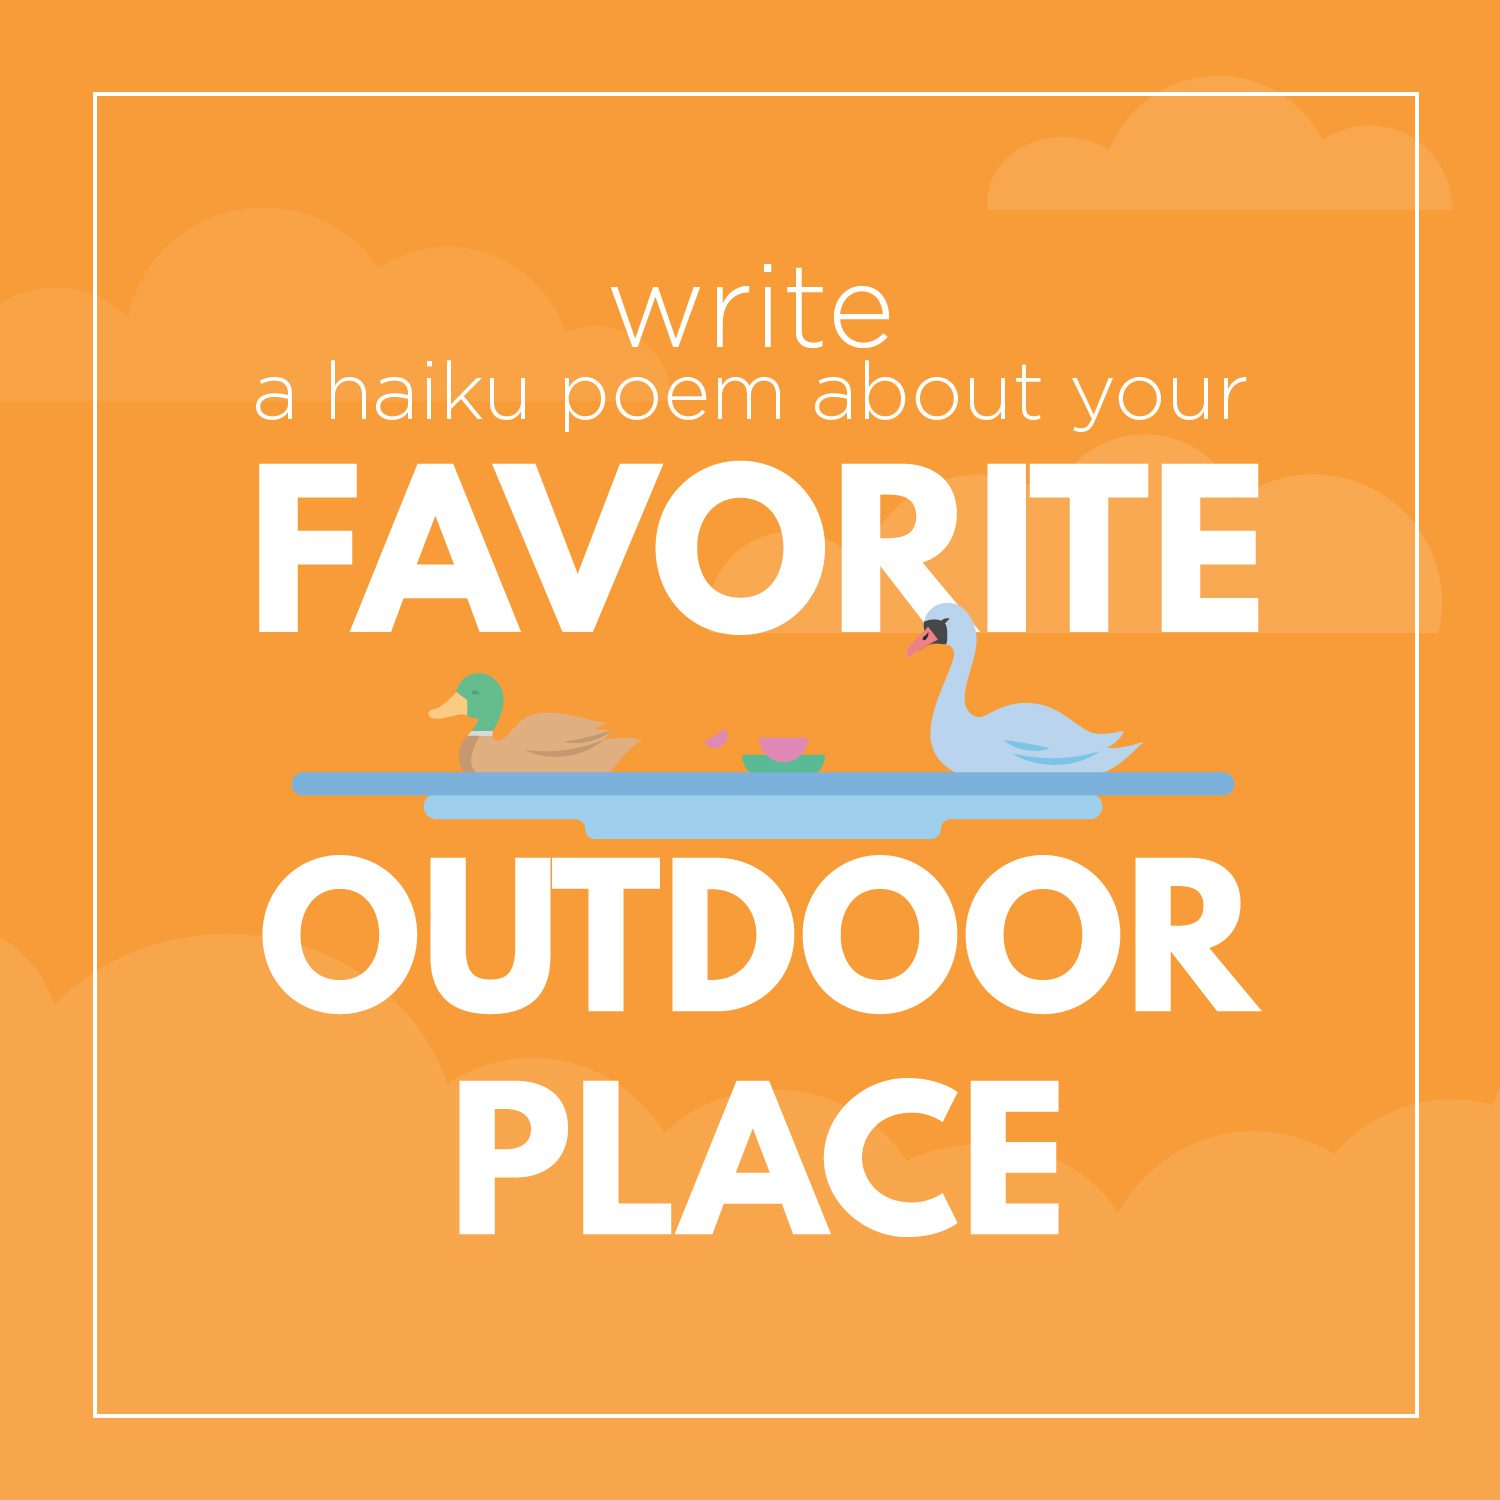 Write a haiku poem about your favorite outdoor place